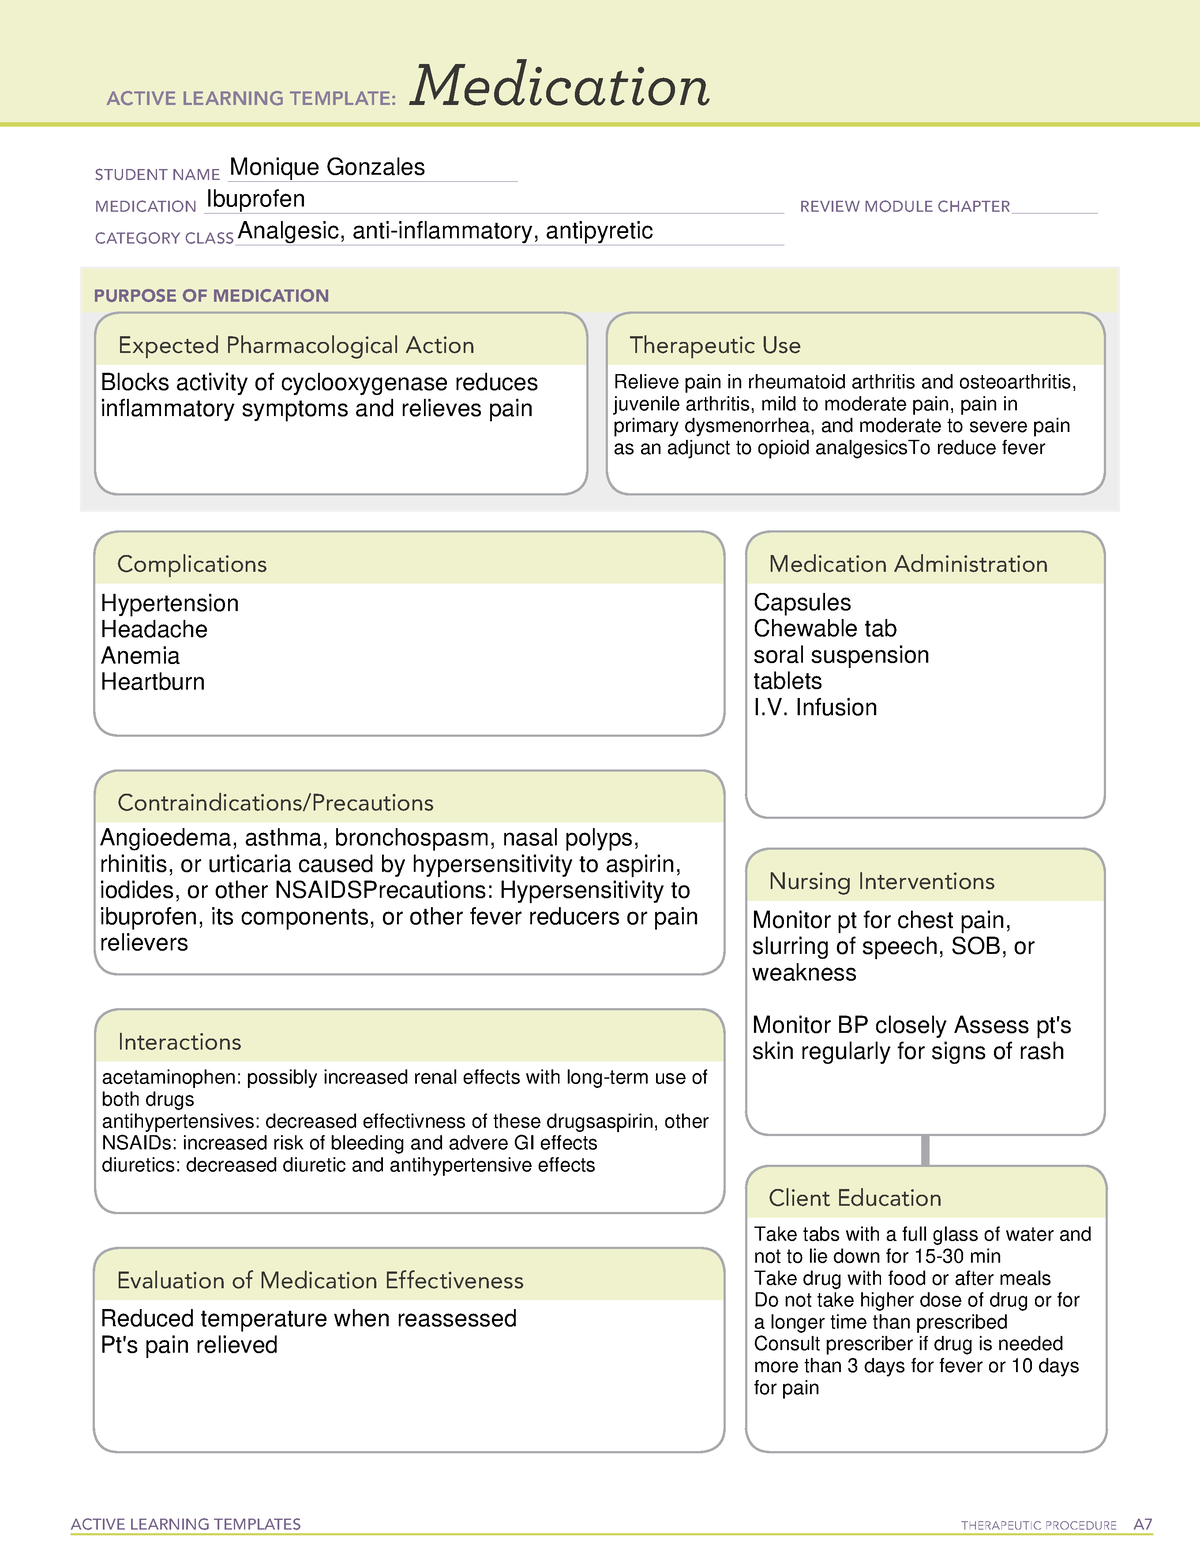 ALT Ibuprofen Active learning template ACTIVE LEARNING TEMPLATES